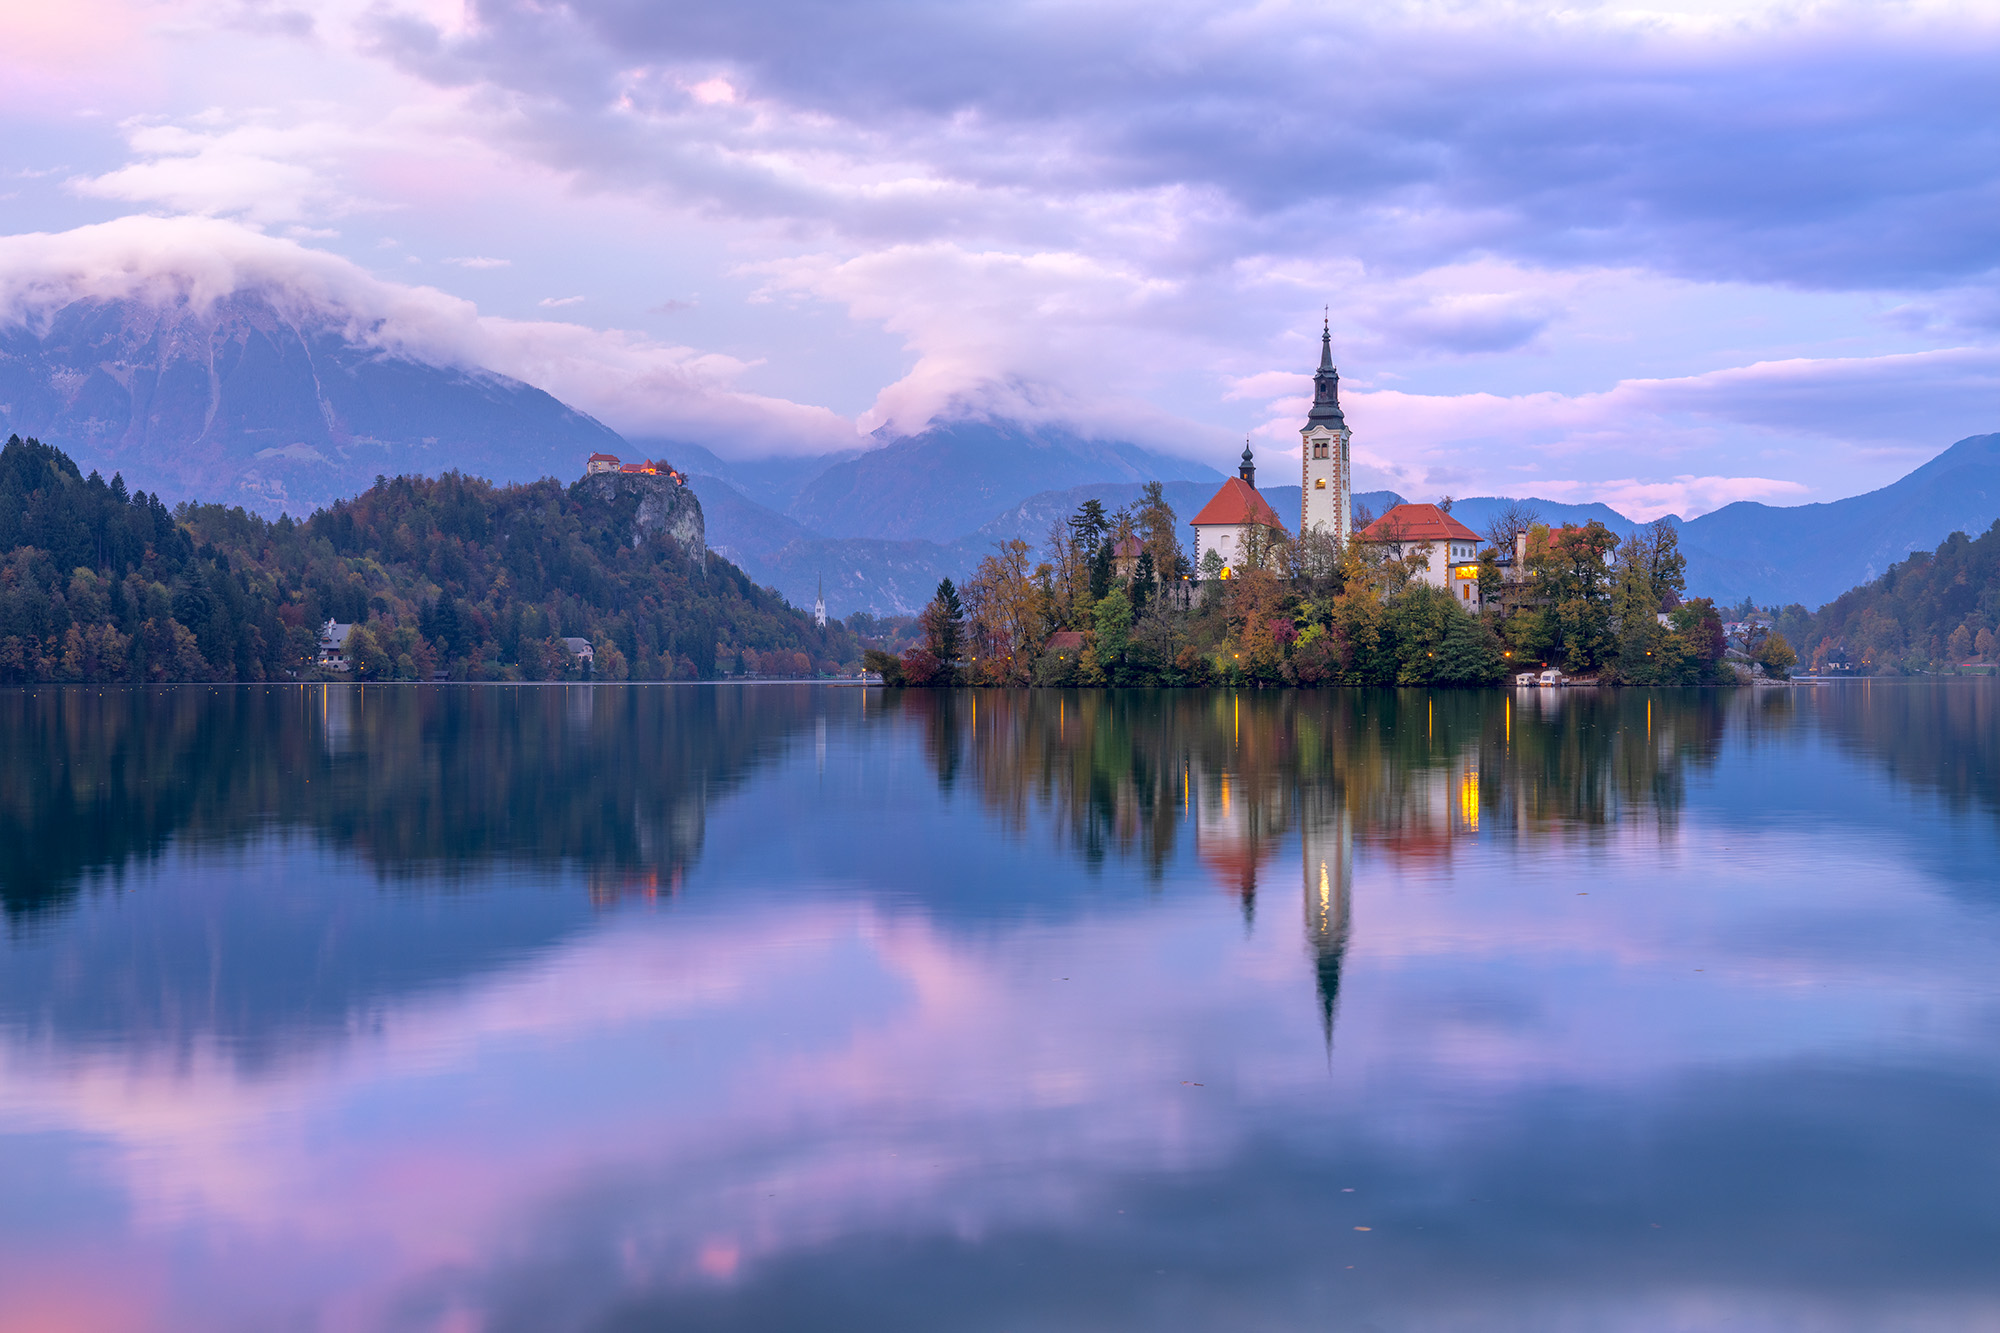 As daylight fades on Lake Bled in Slovenia, the Pilgrimage Church gracefully mirrors upon the tranquil waters. In the distance...